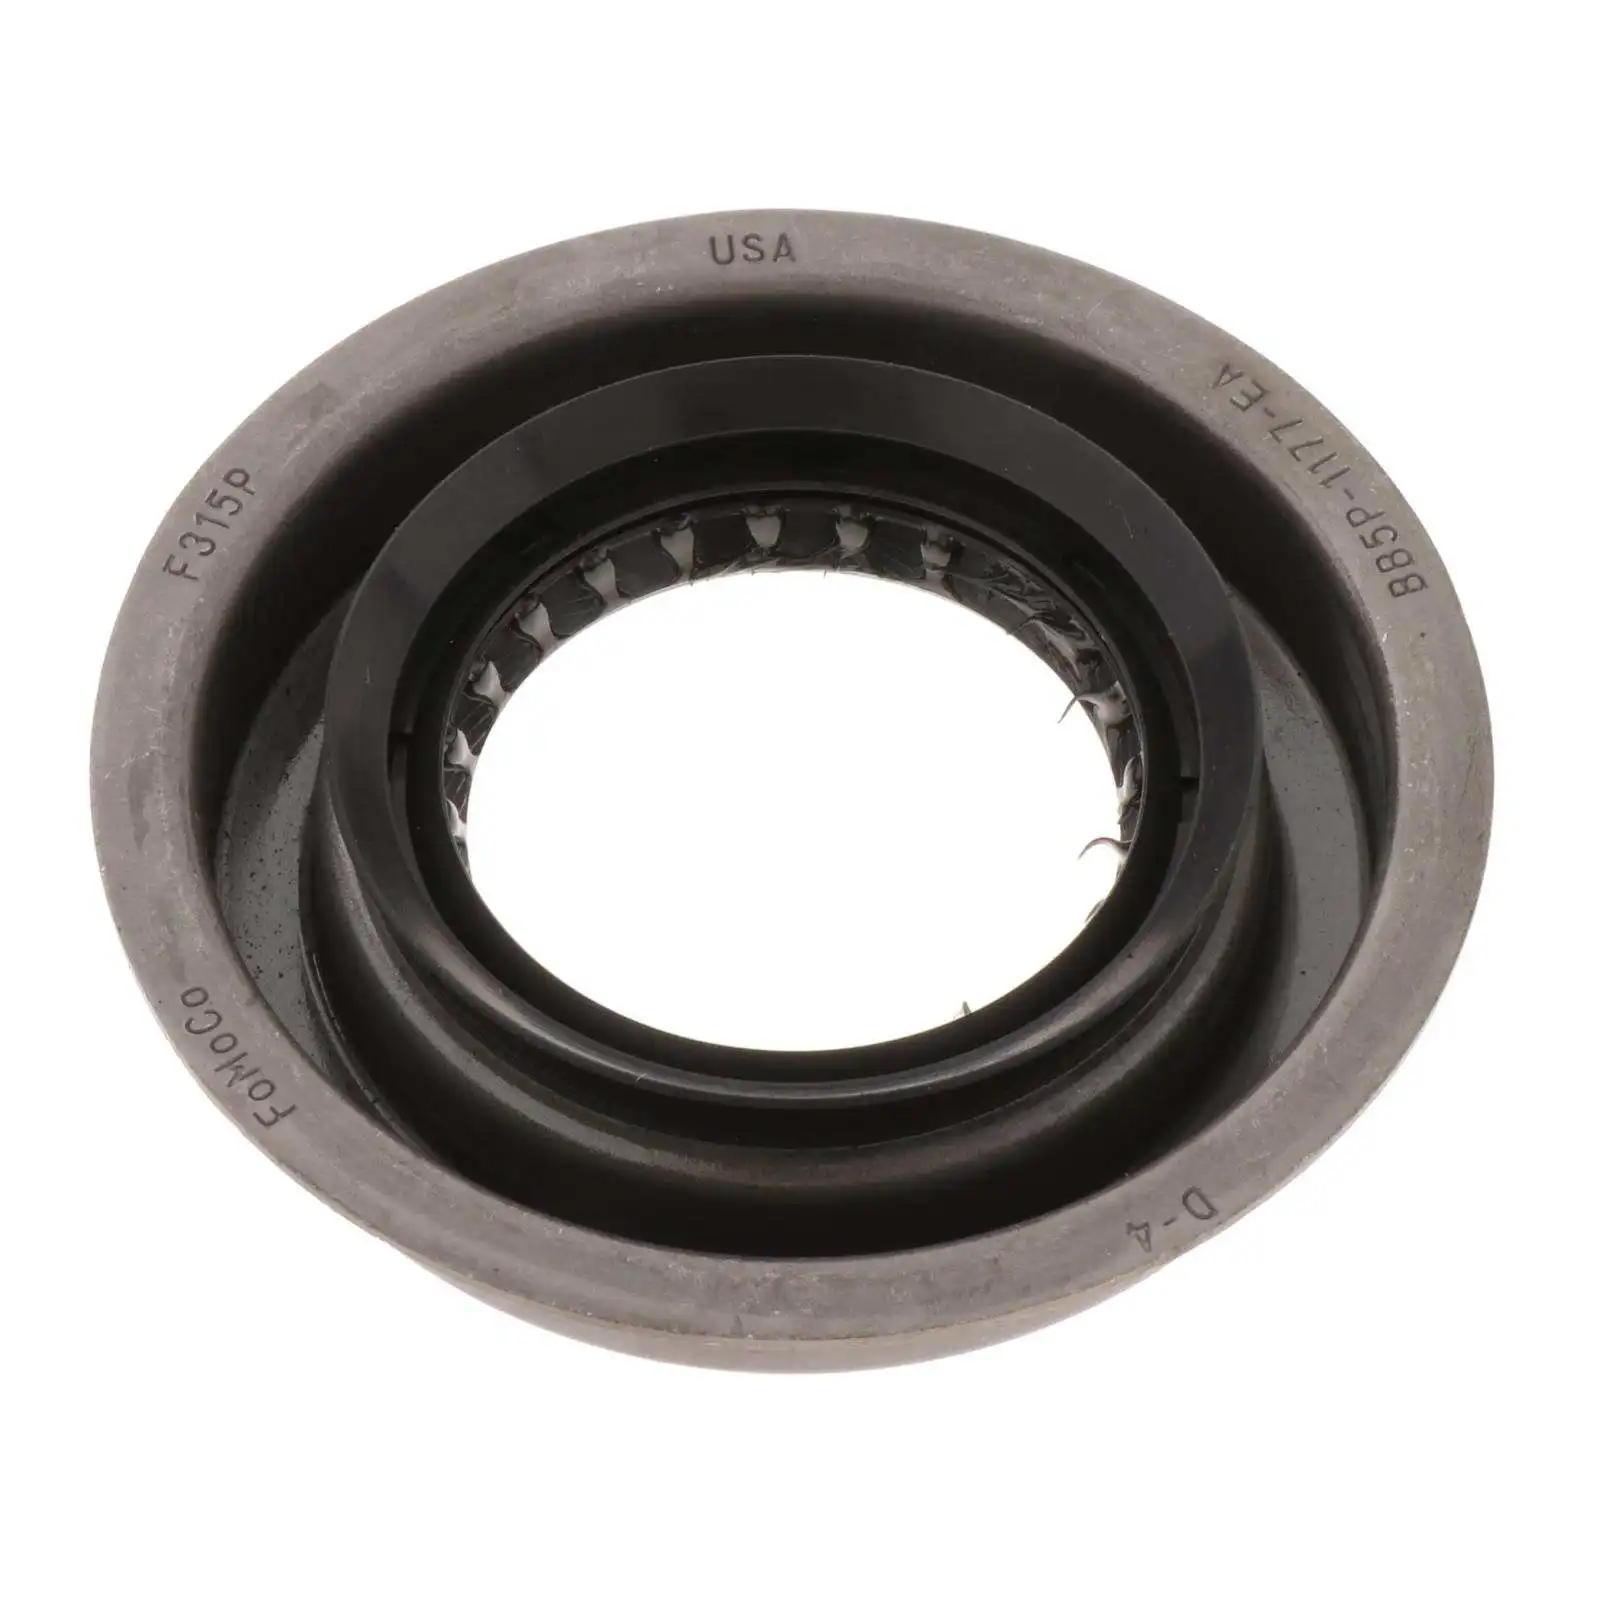 Half Front Shaft Oil Seal 46077B 46076BA Bearings Seals Transmission Oil Seal Fit for Ford